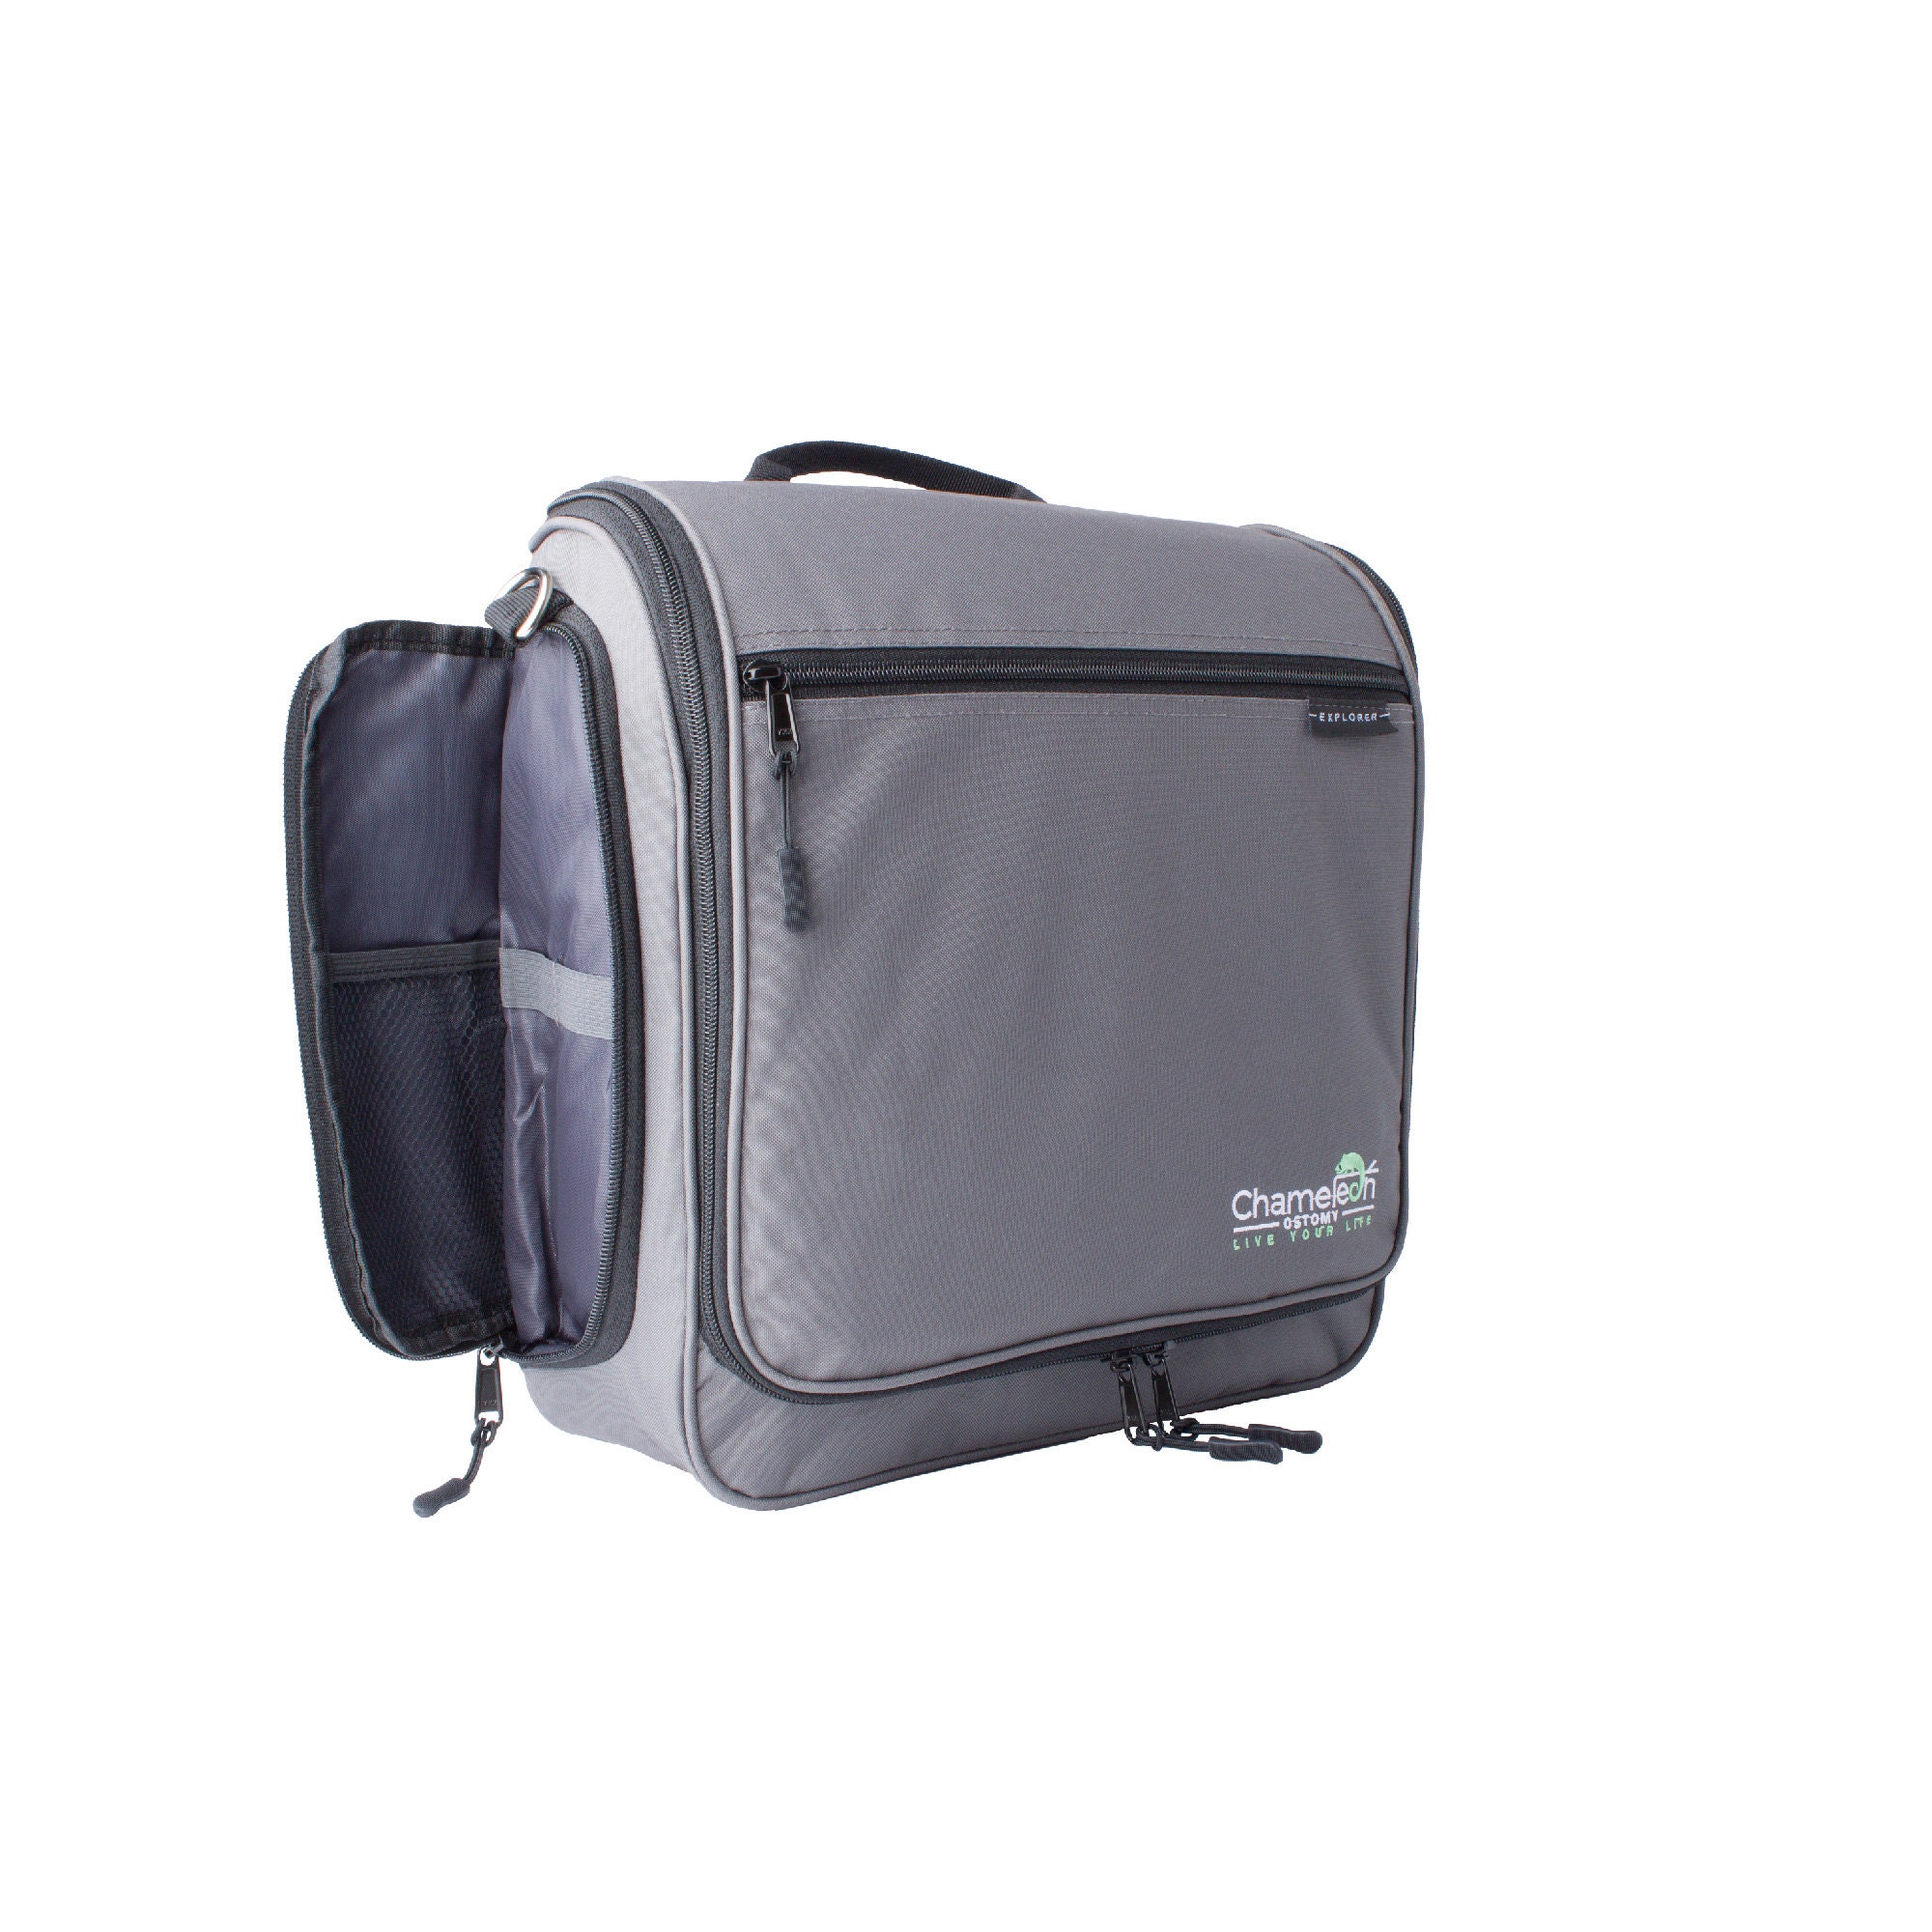 TRAVEL CPAP, Bipap, Nebulizer, Diabetes, Camera, Lunch BAG With